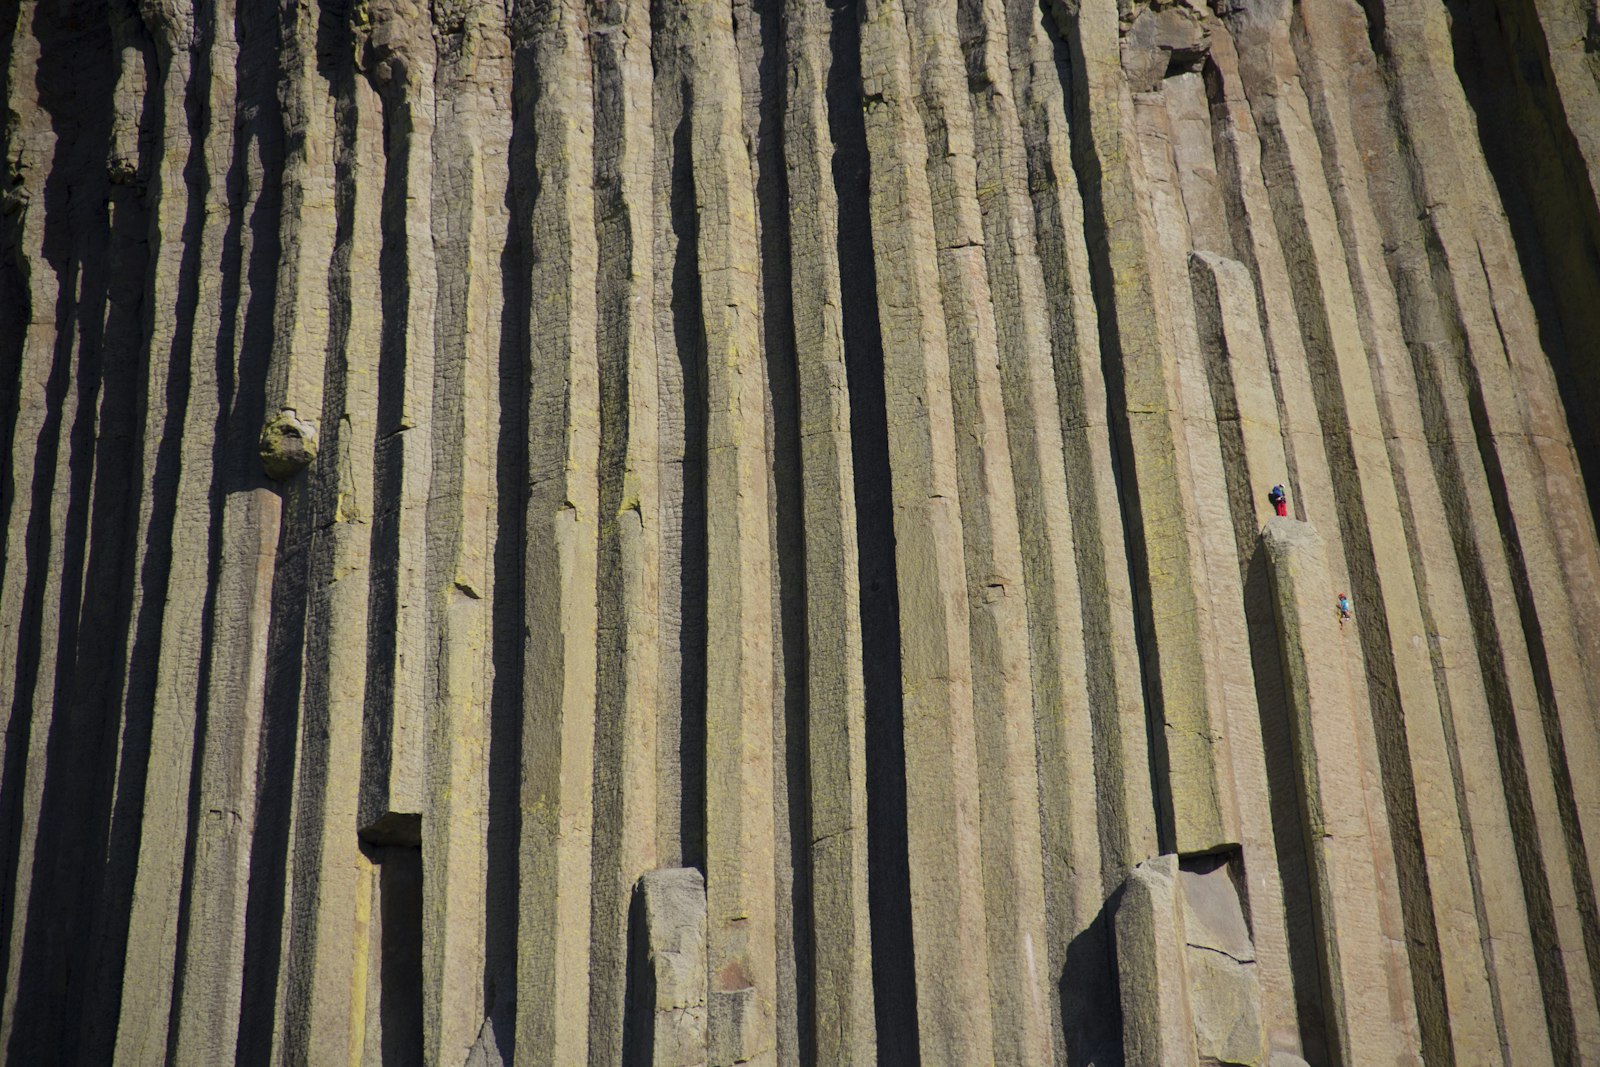 A view of the columns of Devils Tower with two climbers that appear very small amidst the giant columns.